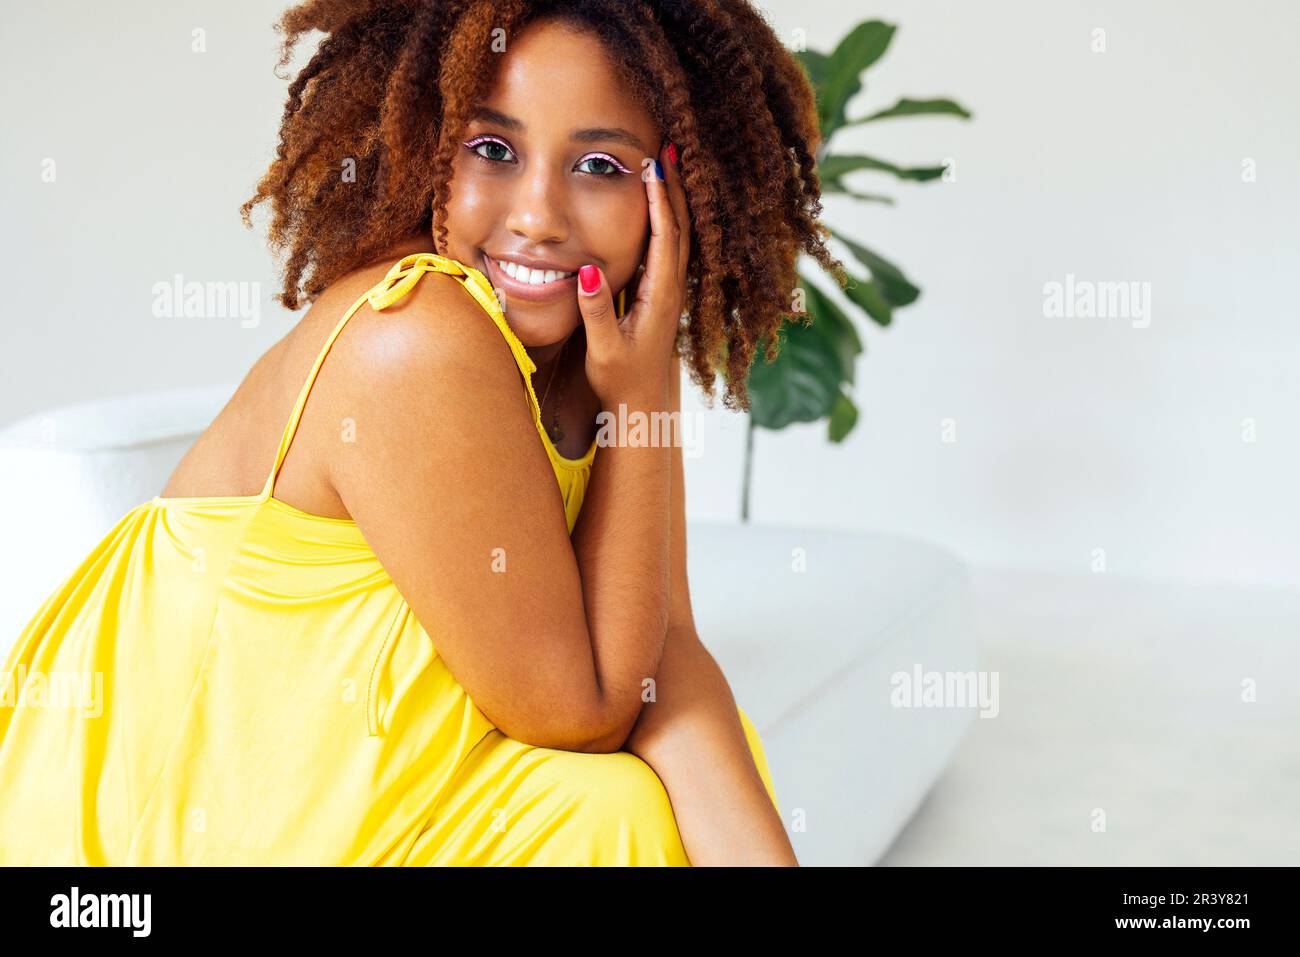 Beautiful curvy oversize young afto american woman in a yellow dress Stock Photo